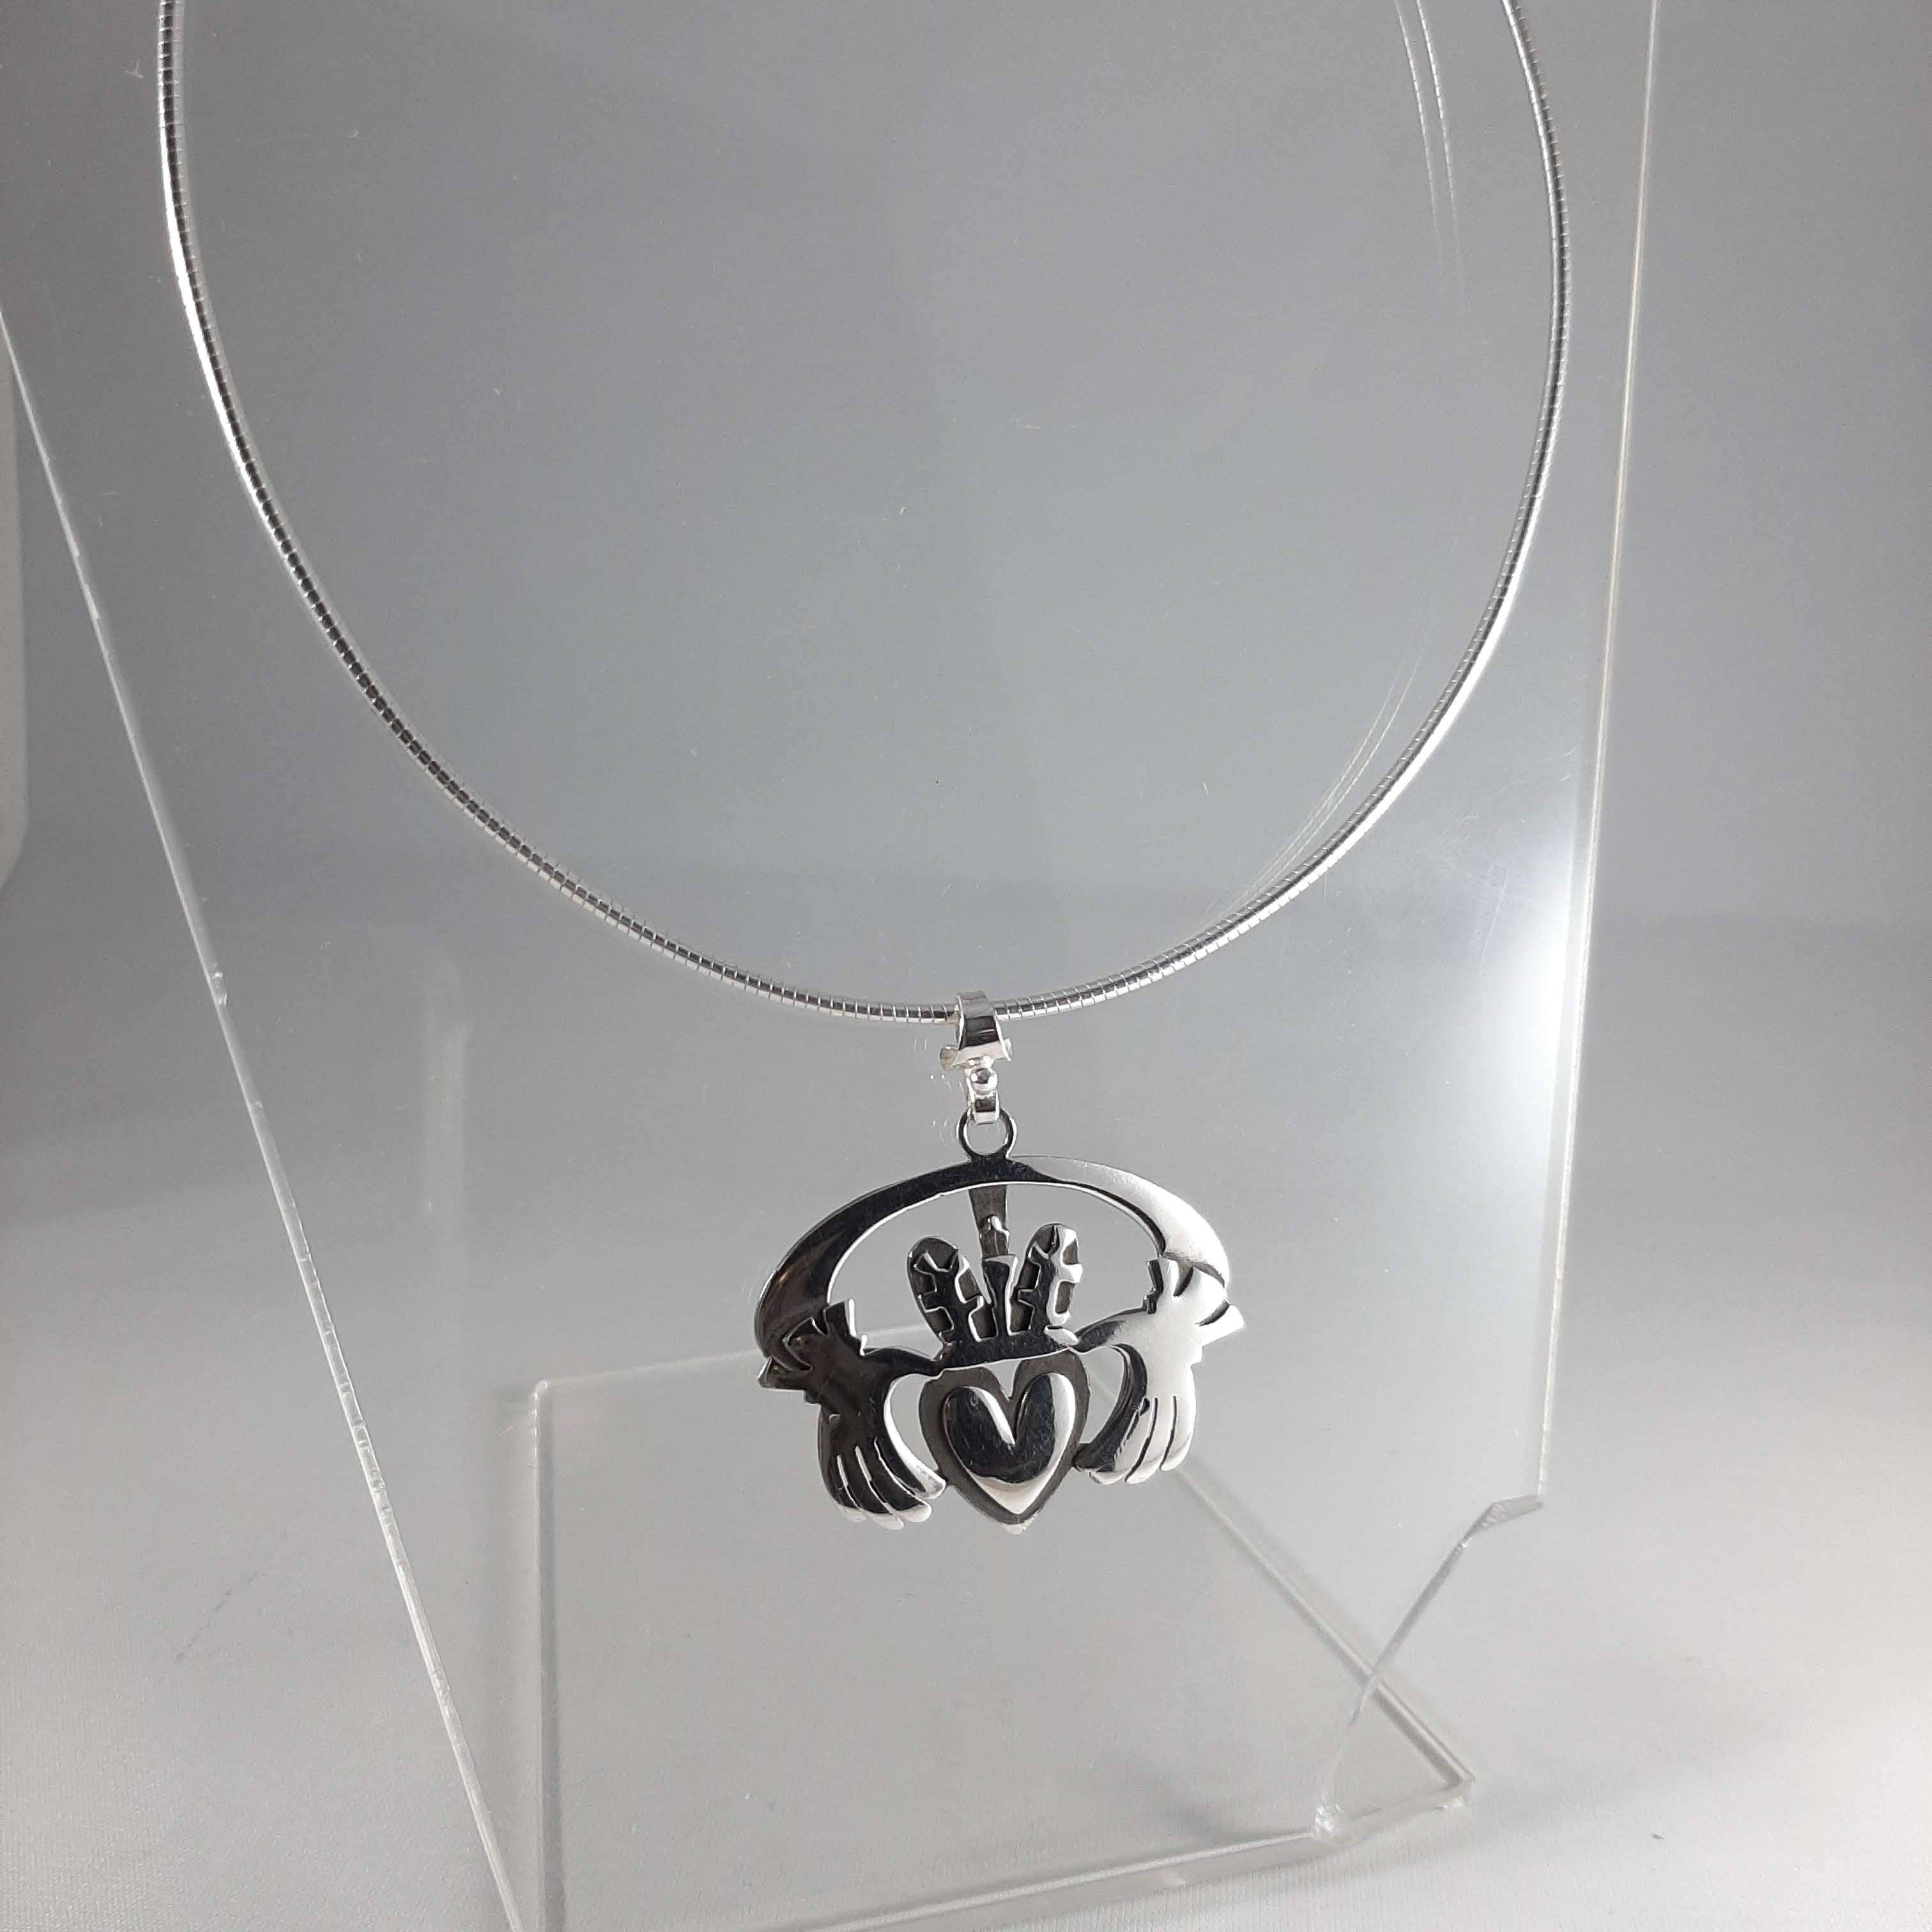 Handcrafted Sterling Silver Claddagh Pendant Mounted on a Silver Torc Neckpiece